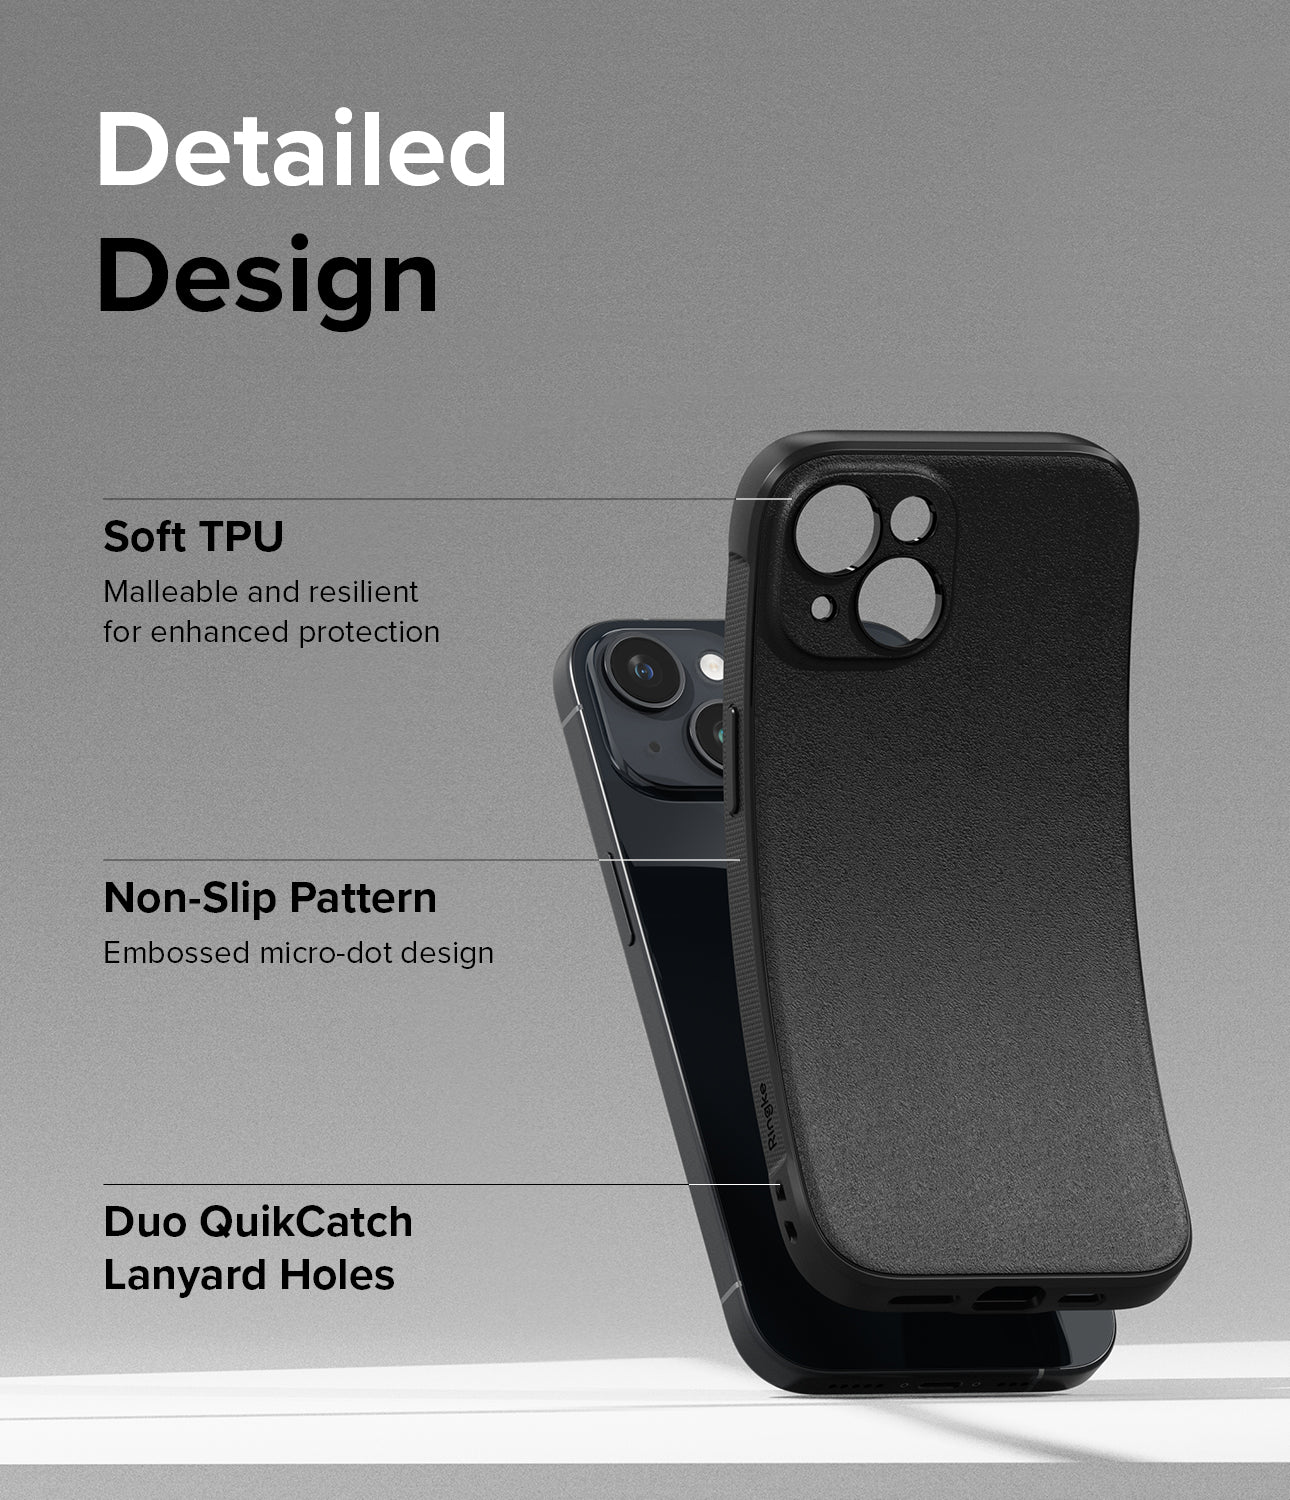 iPhone 15 Case | Onyx - Black / Dark Green. Detailed Design. Soft TPU. Malleable and resilient for enhanced protection. Non-Slip Pattern. Embossed micro-dot design. Duo QuikCatch Lanyard Holes.